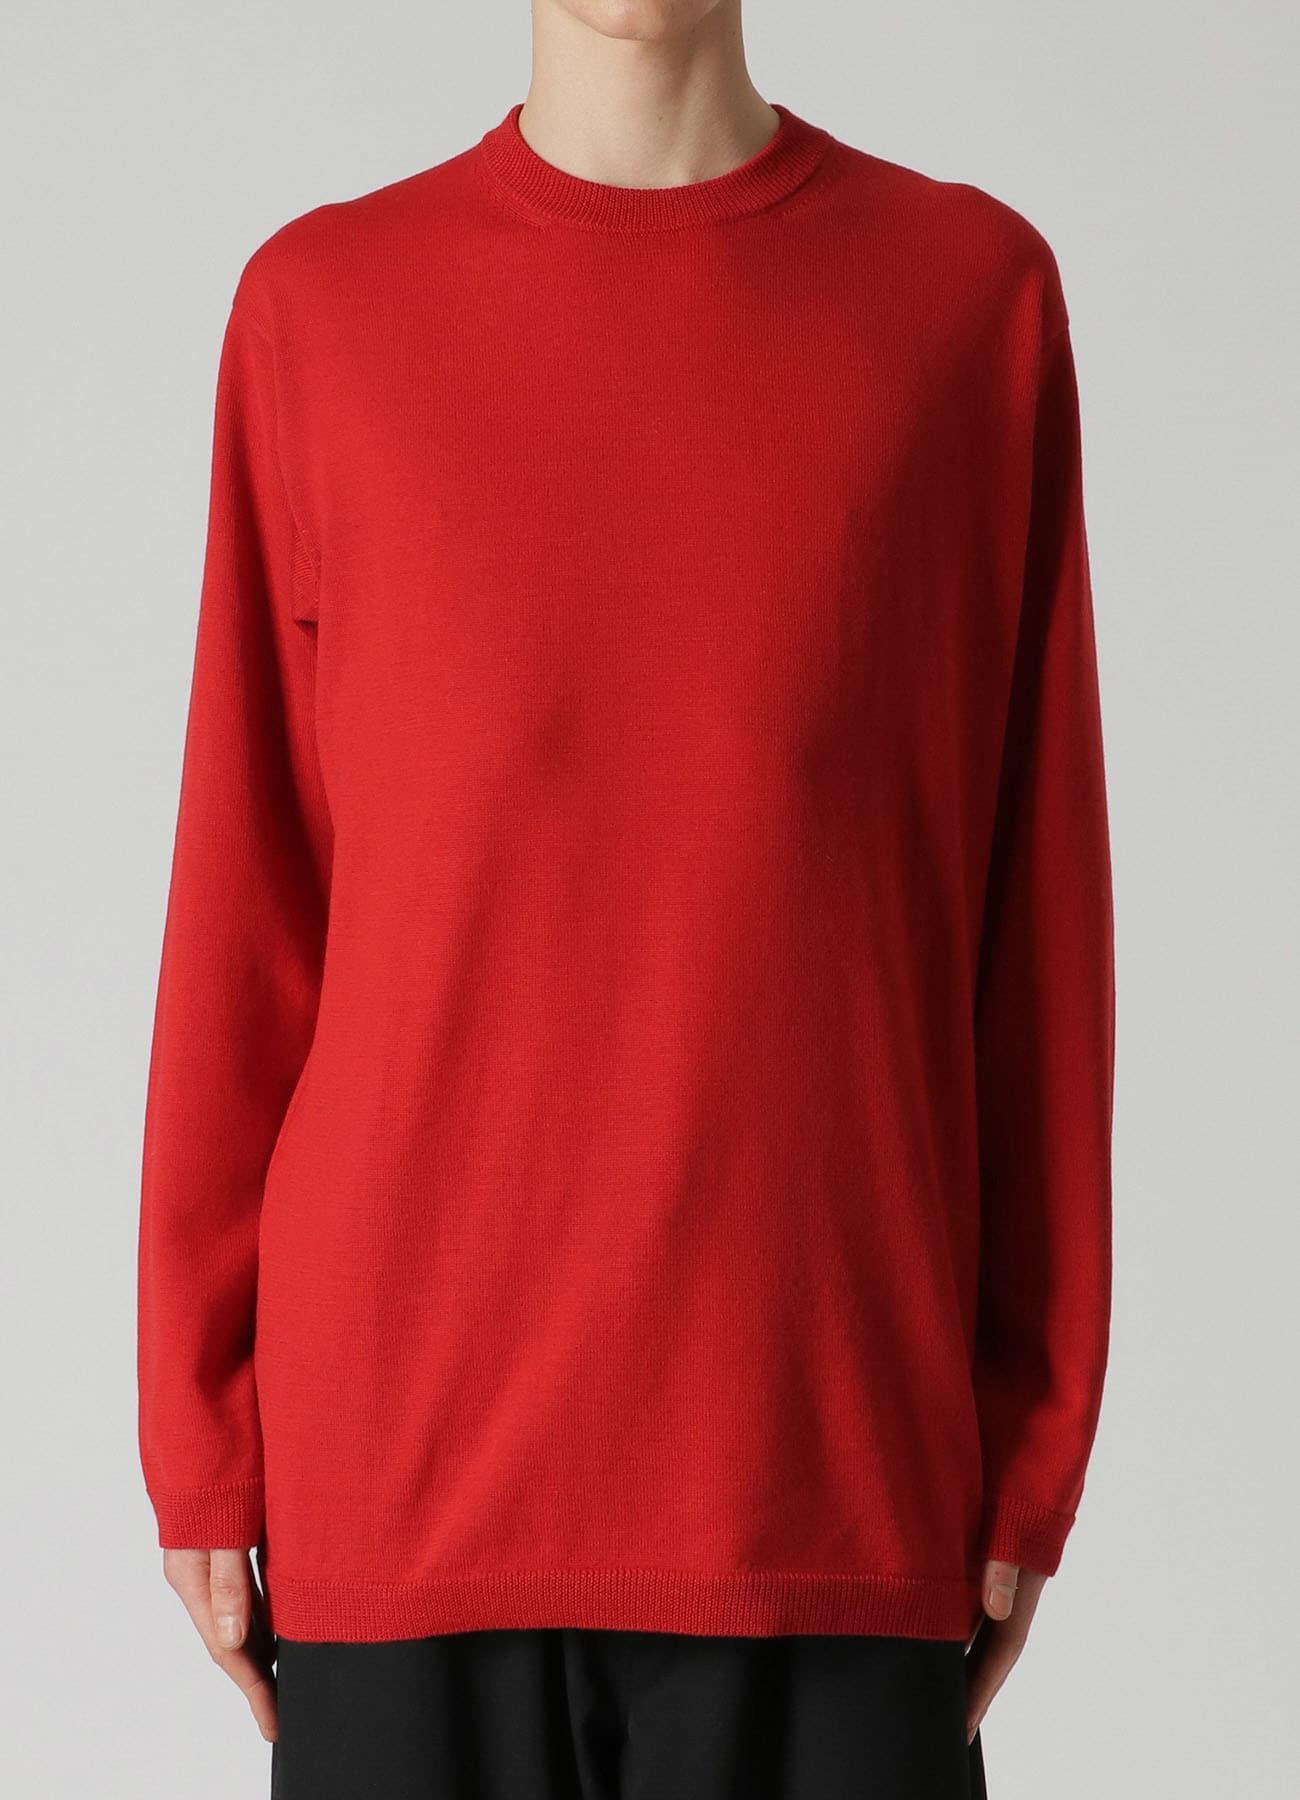 12G JERSEY Y's for men LOGO ROUND NECK KNIT